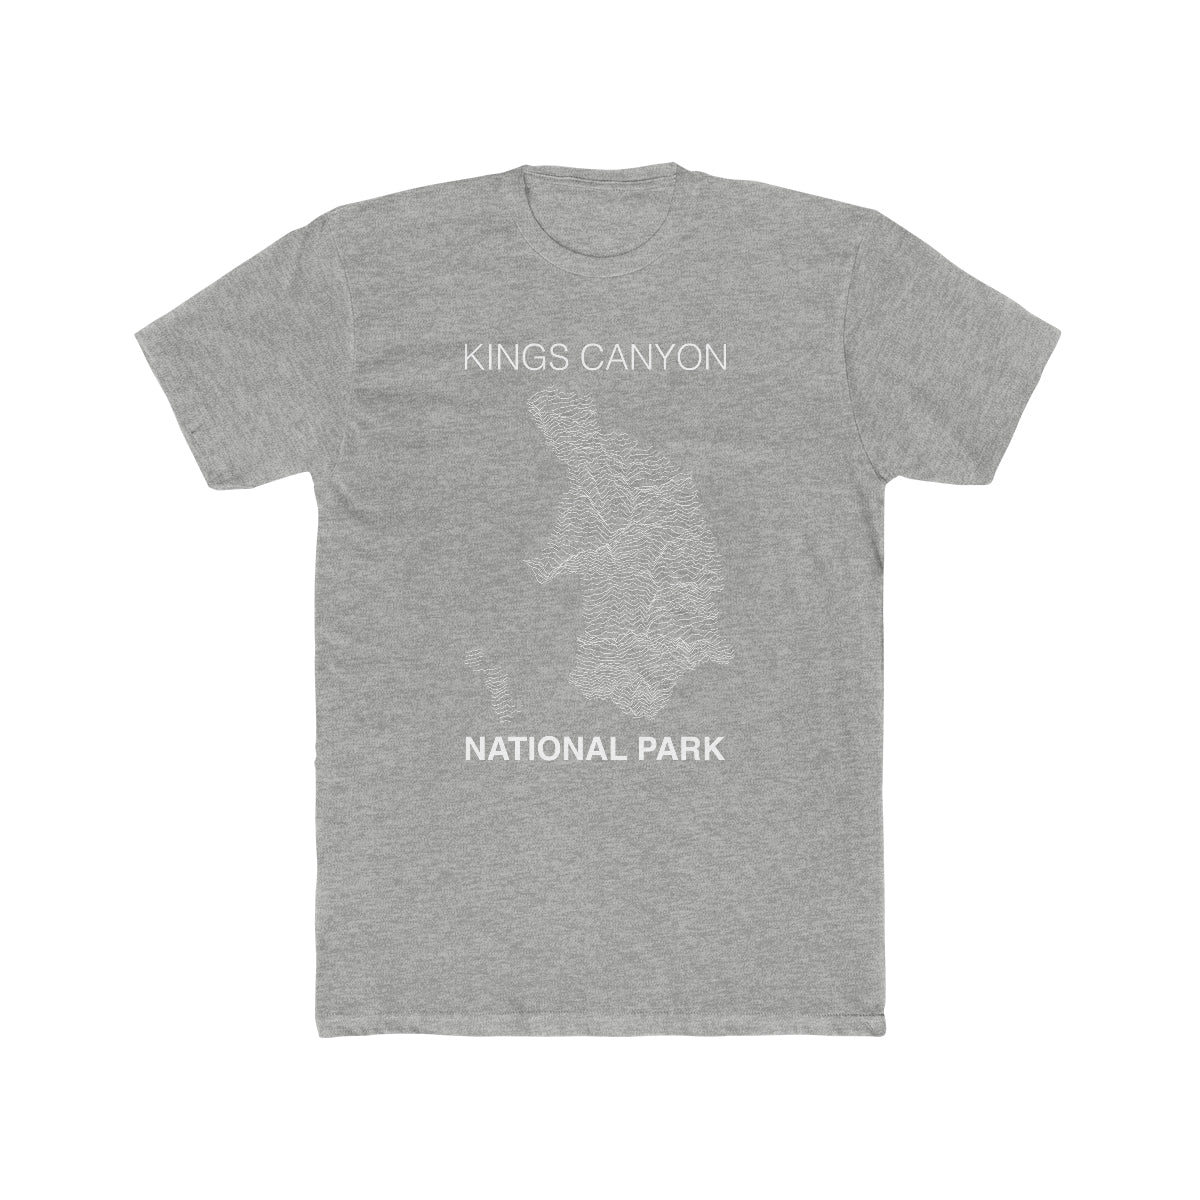 Kings Canyon National Park T-Shirt Lines